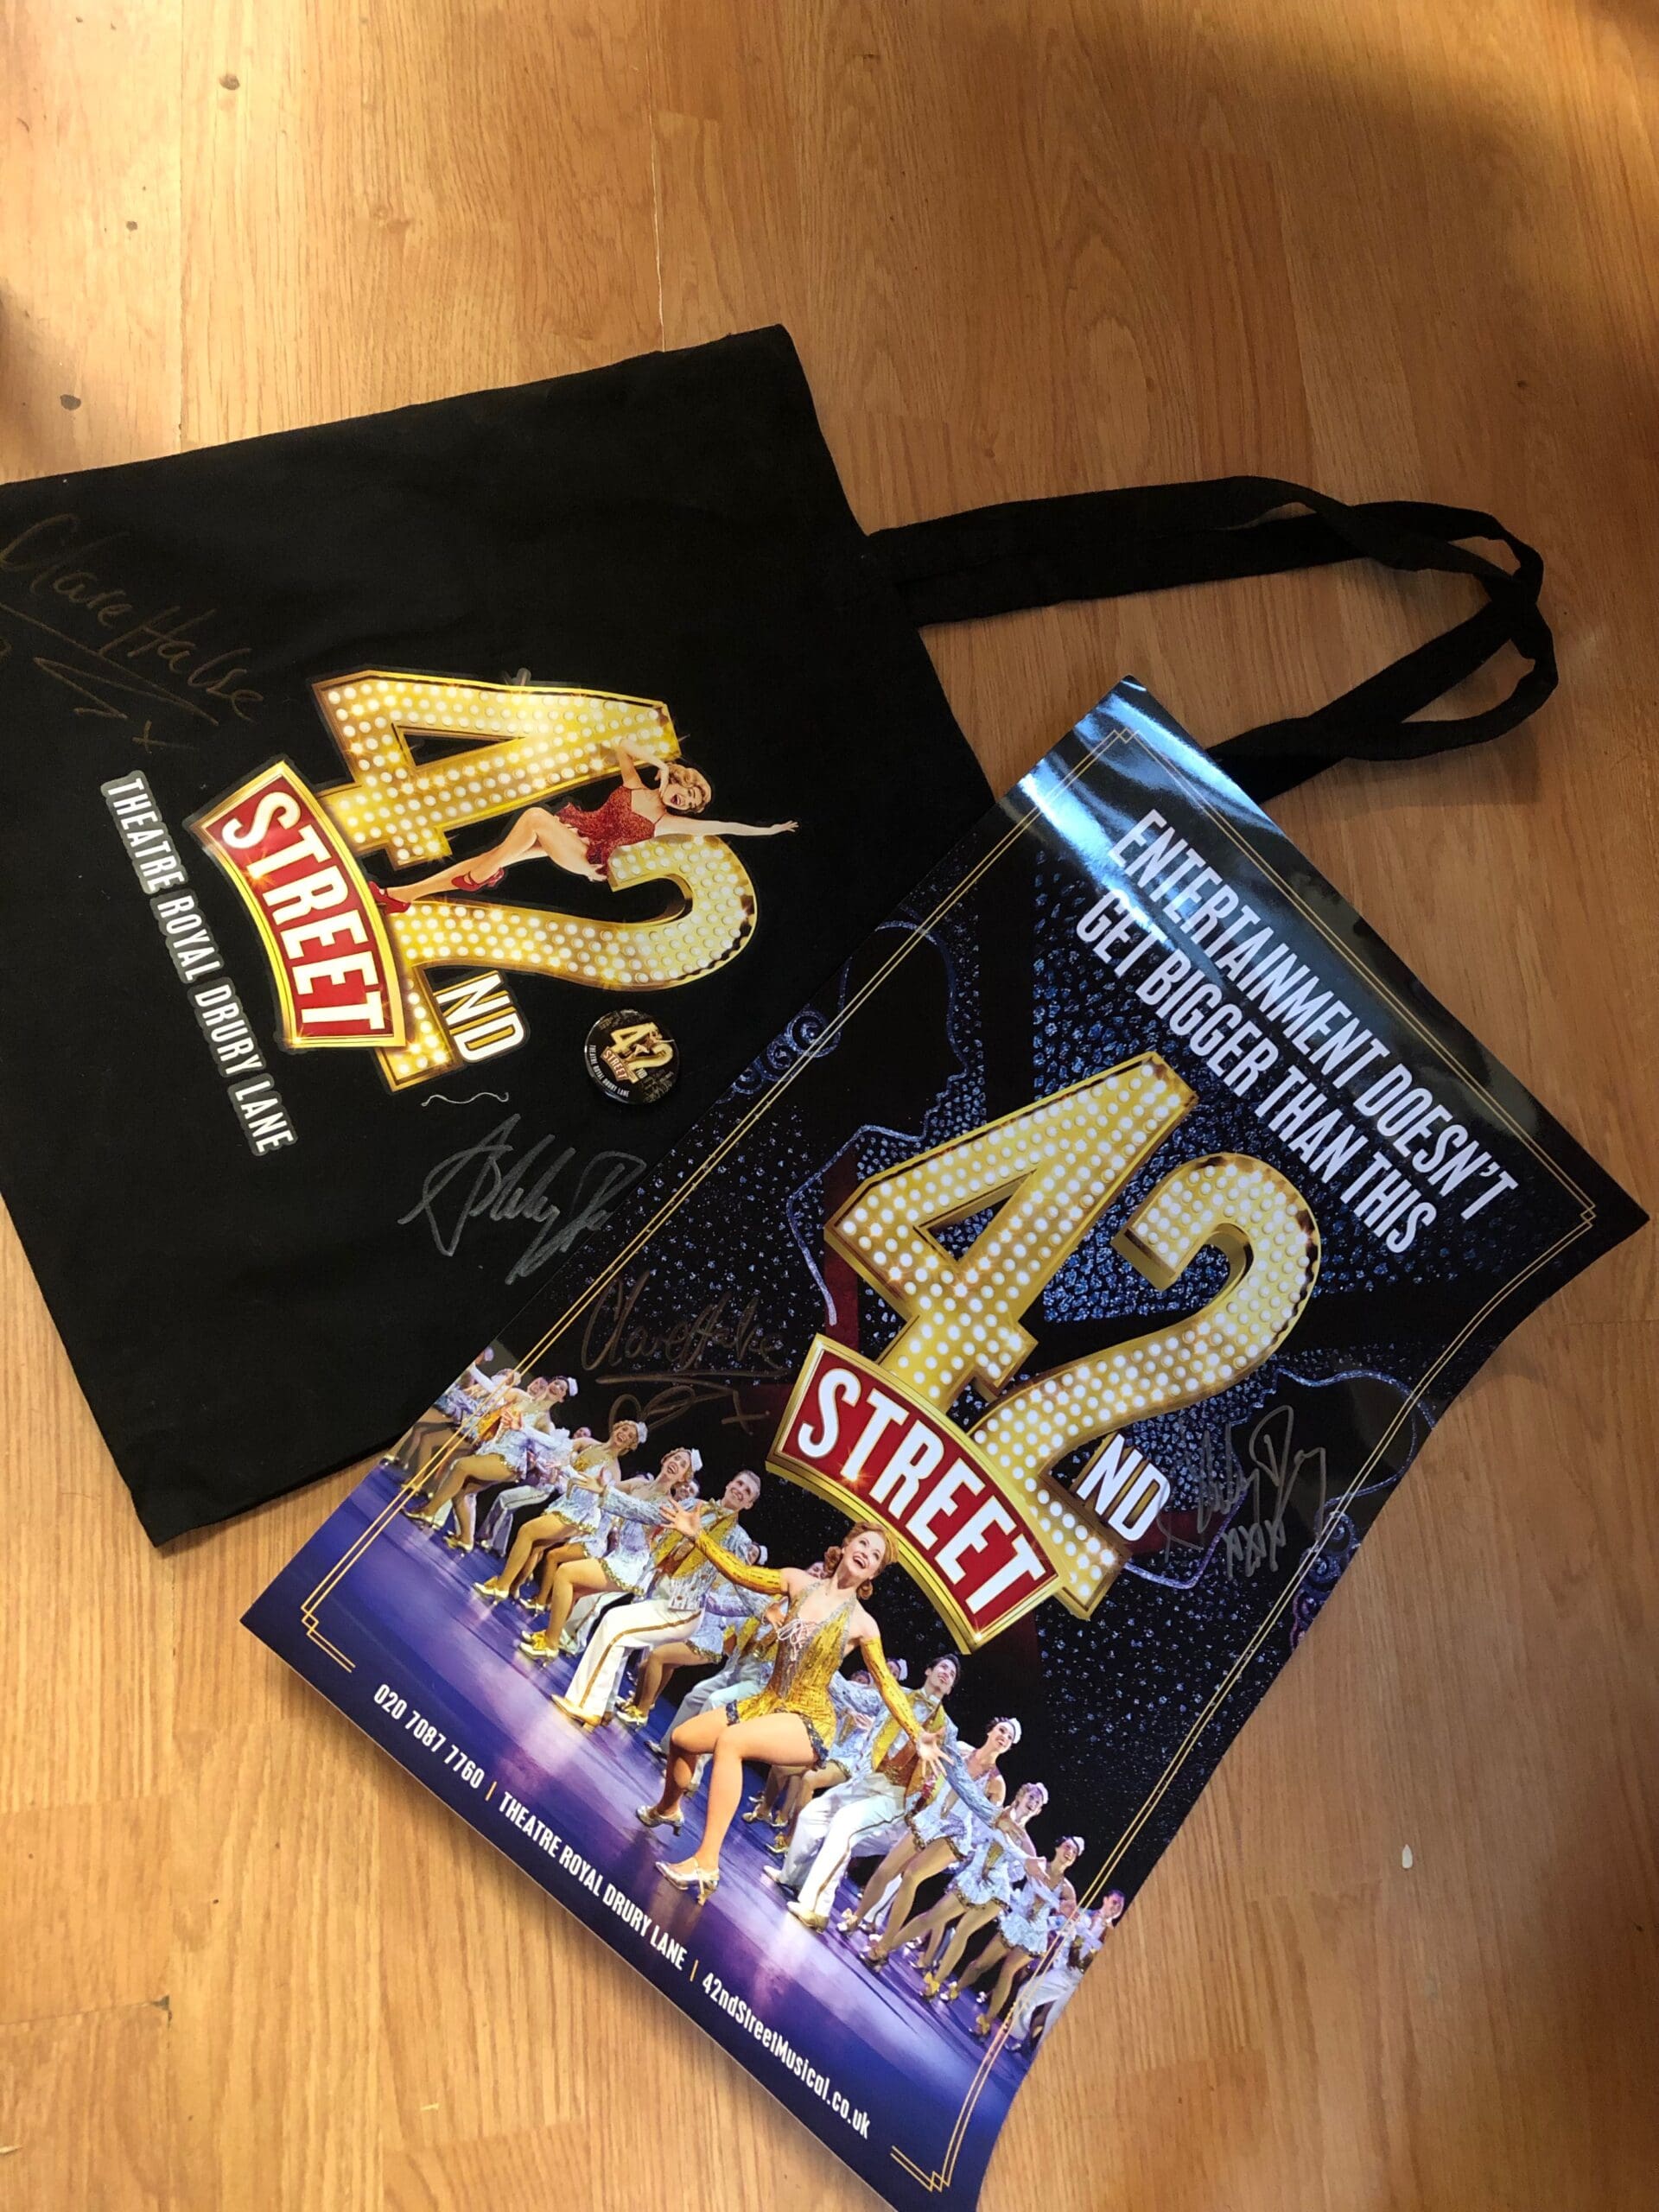 Featured image for “Enter our competition for a chance to win a signed 42nd Street poster and tote bag”